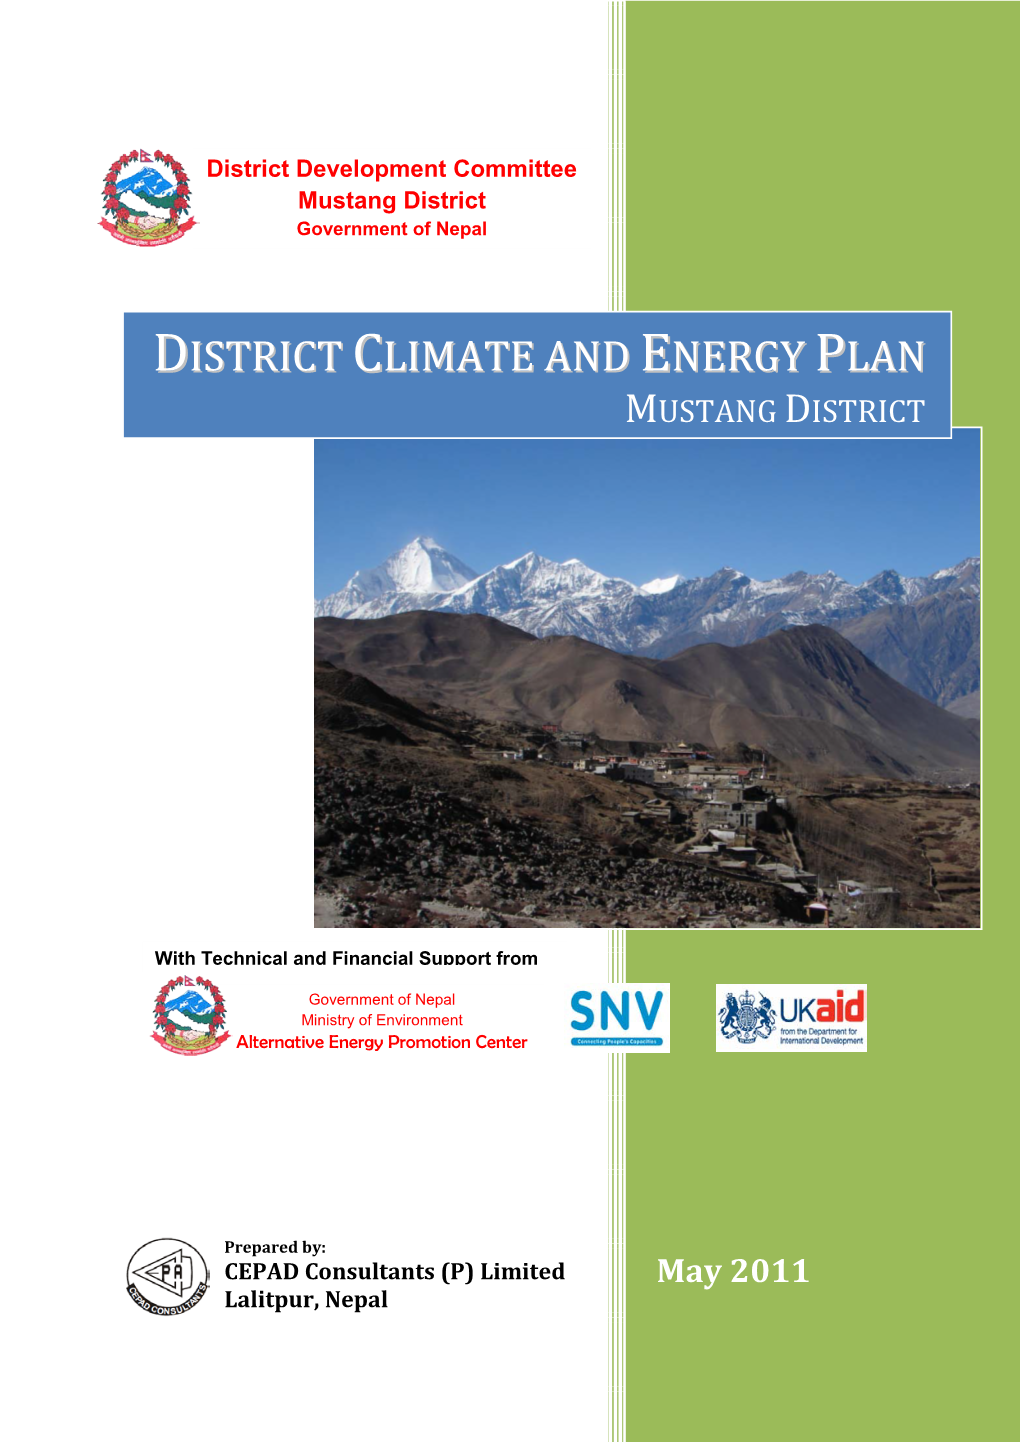 District Climate and Energy Plan for Mustang District